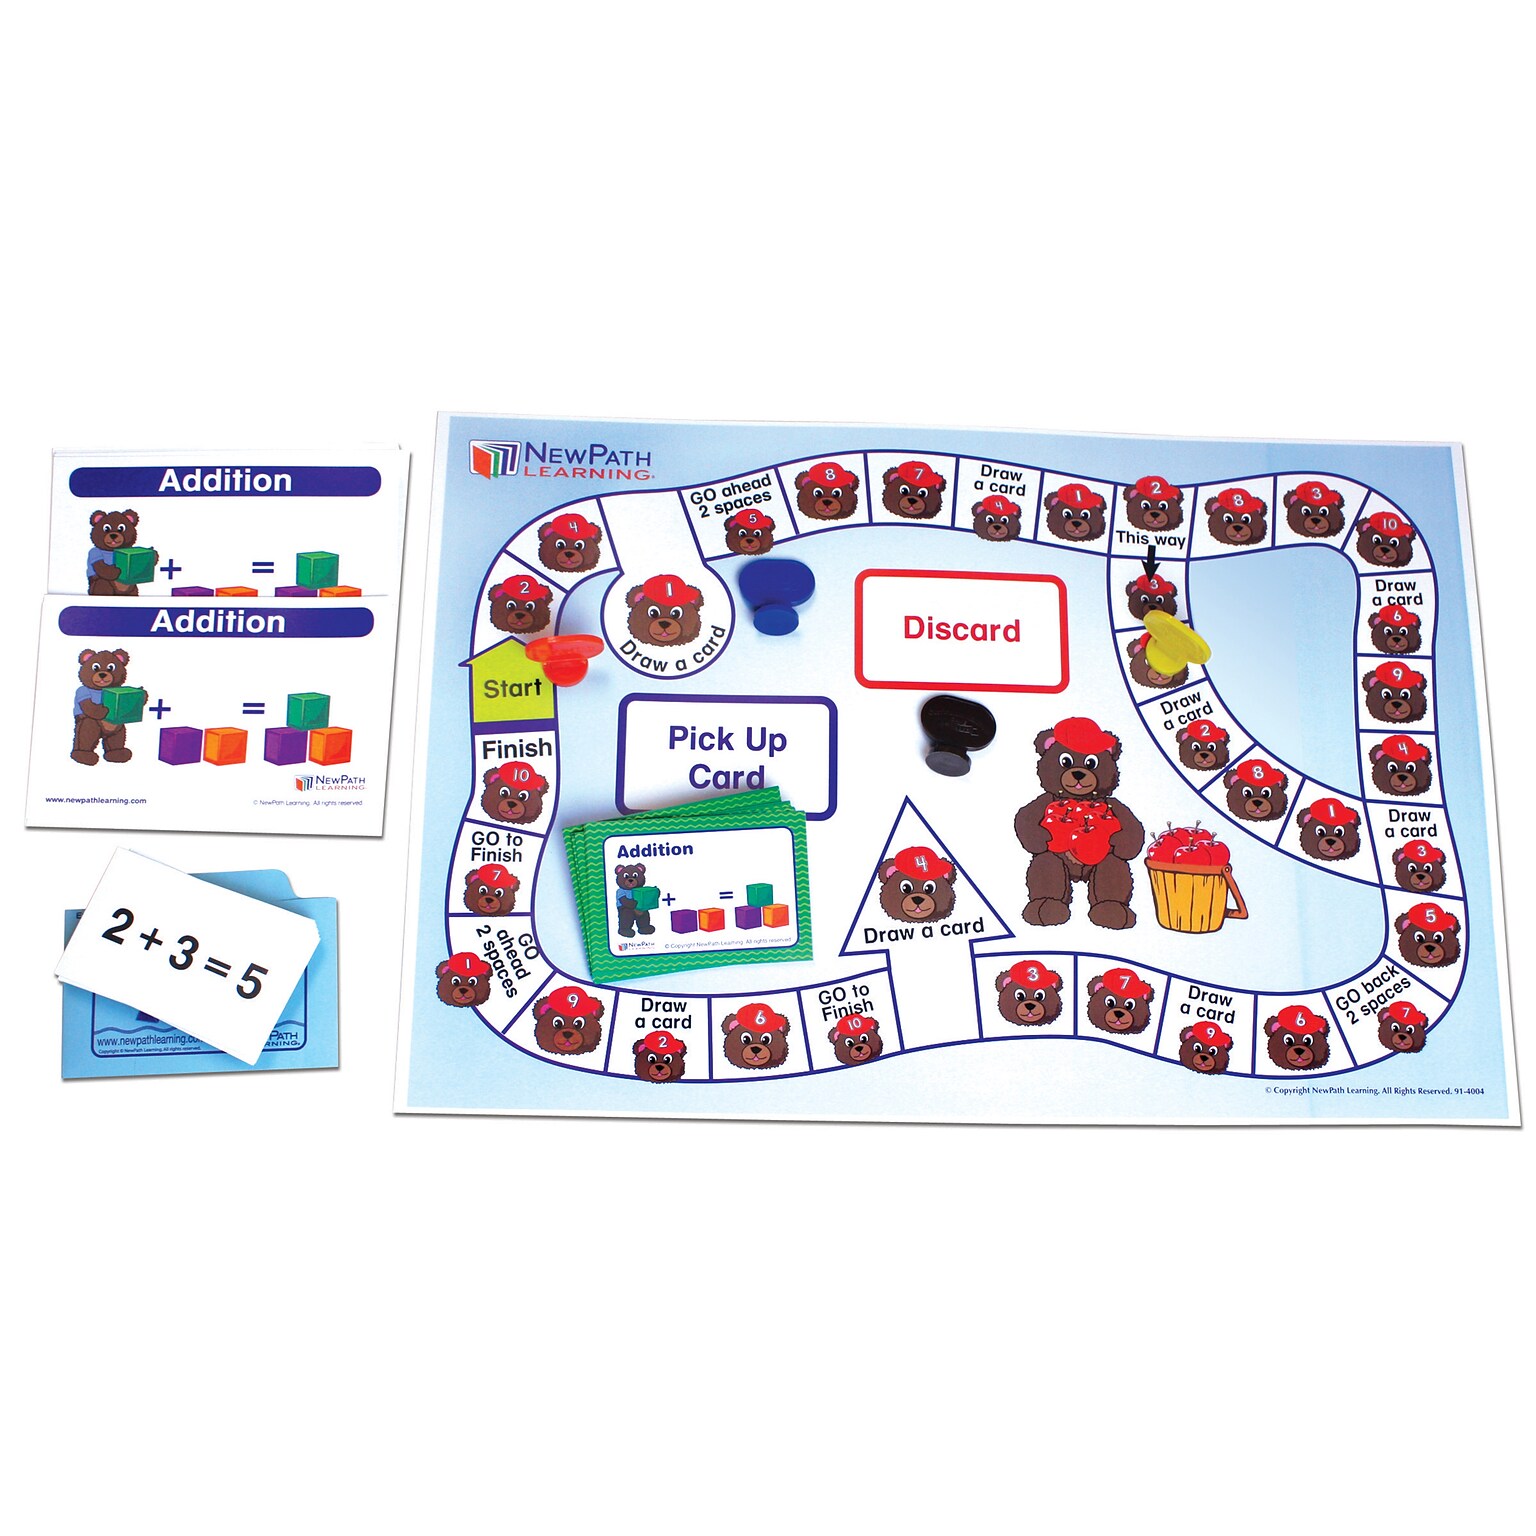 New Path Learning Math Readiness Learning Center Games, Addition, Grades K-2 (NP-230024)